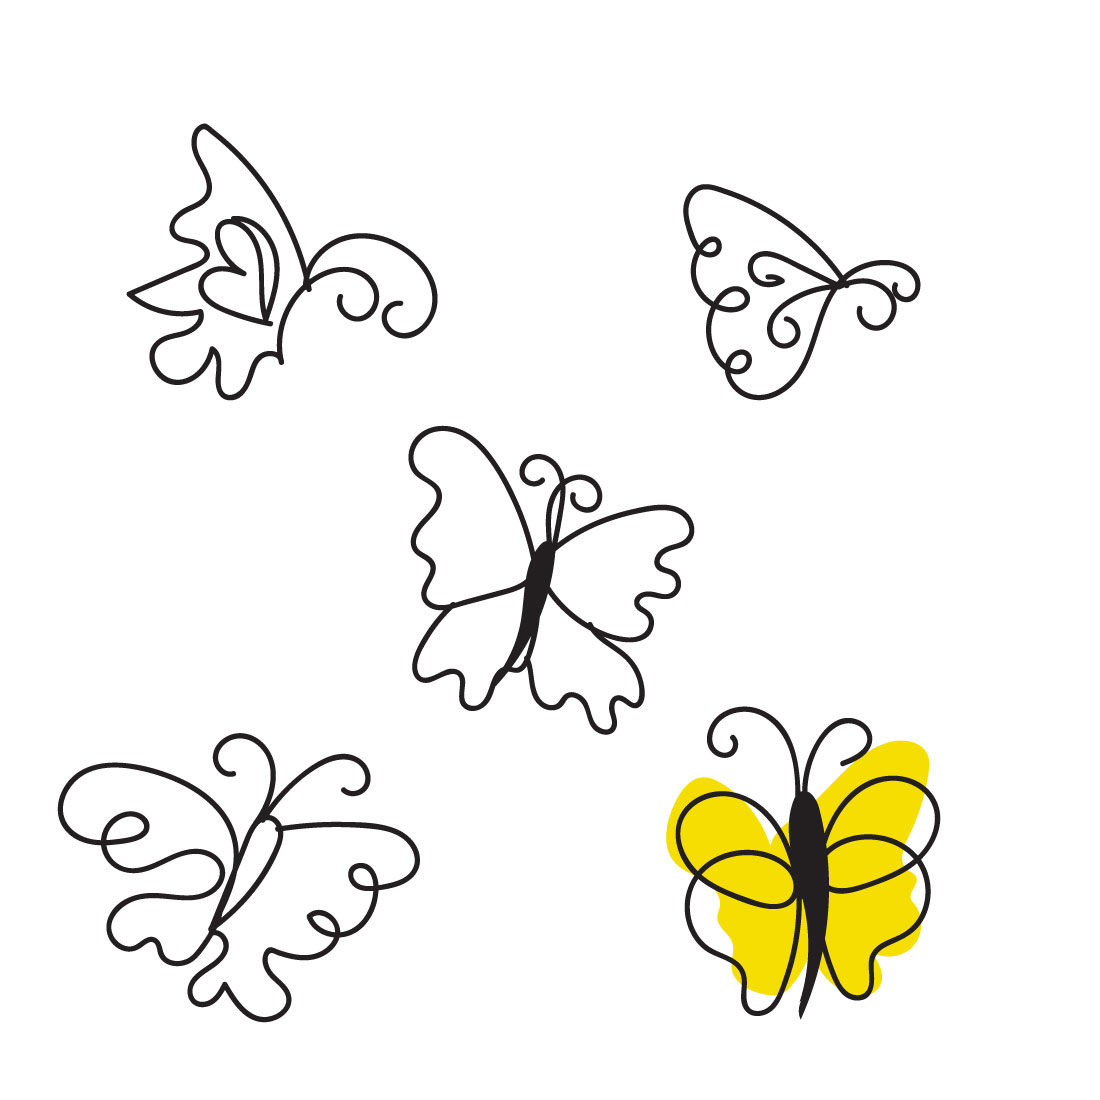 Group of four butterflies flying through the air.